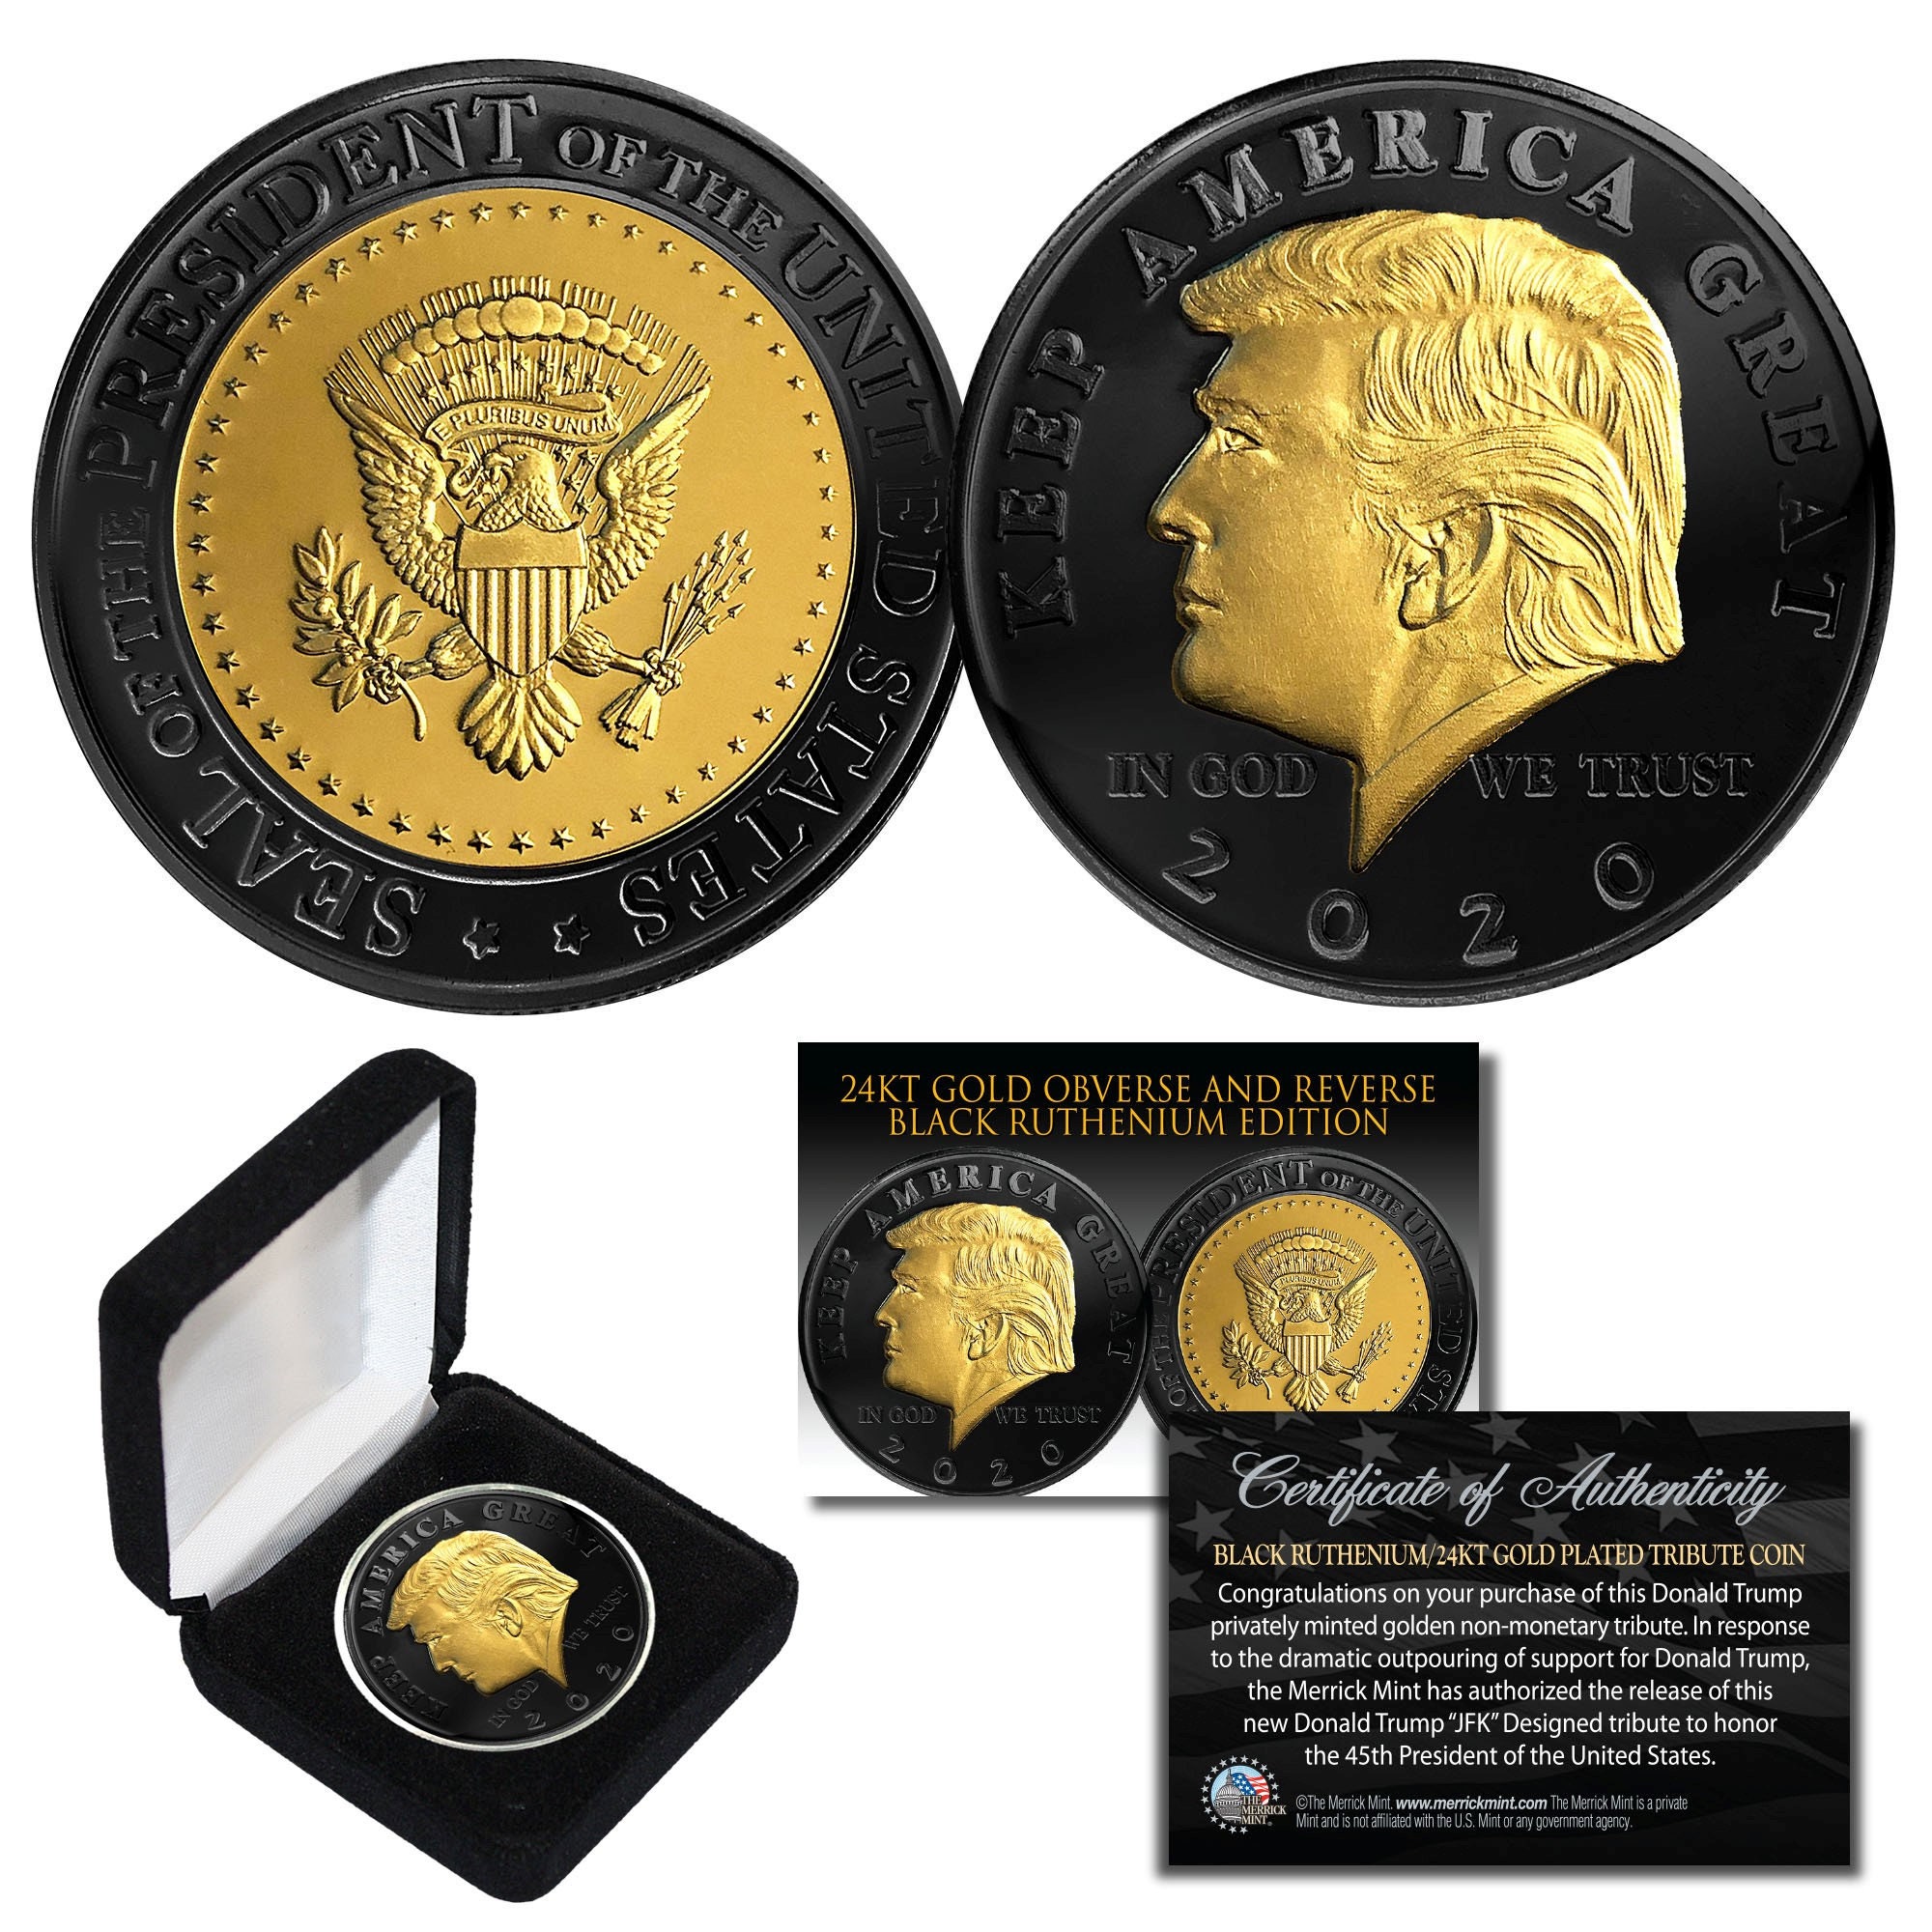 Clear Stand Cert 18 24kt Gold Plated Replica Medallion eTradewinds Donald Trump 1st Term 4 Coin Gift Box Set 2017 19 20 1st Term Clear5 of Auth w/Stand 